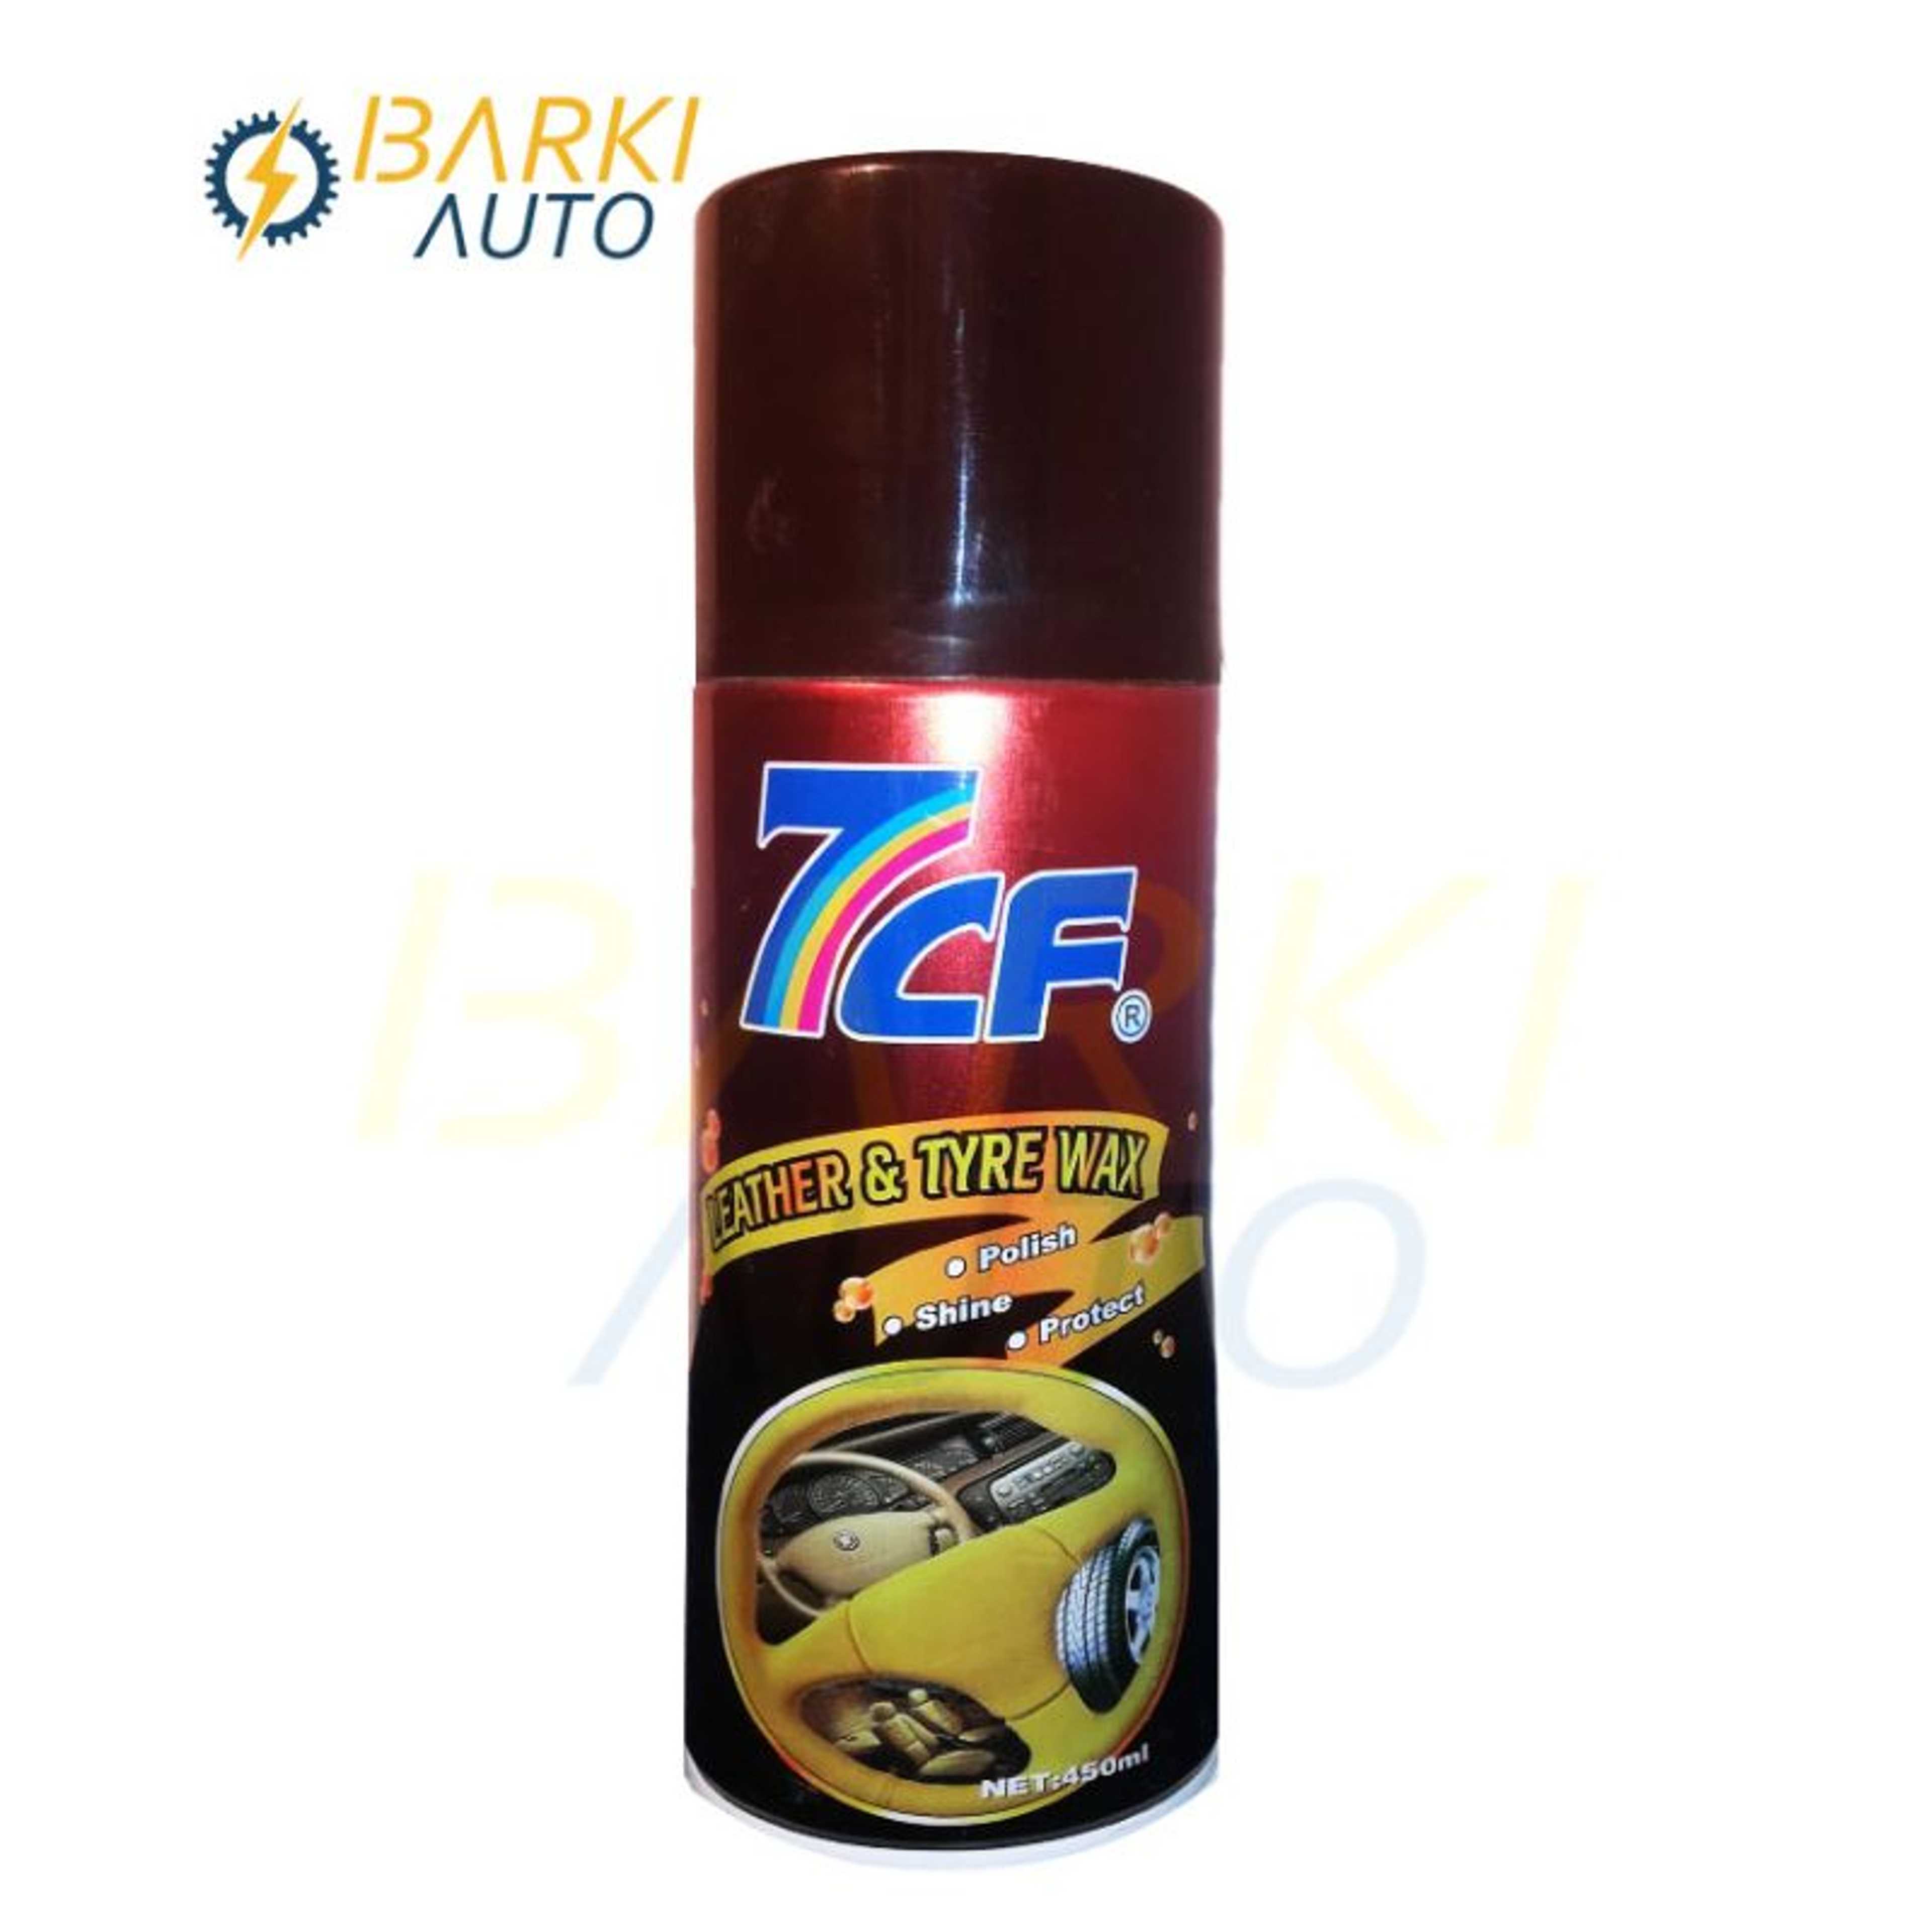 7cf Dashboard, Leather & Tyre Wax Spray 450ml car and household